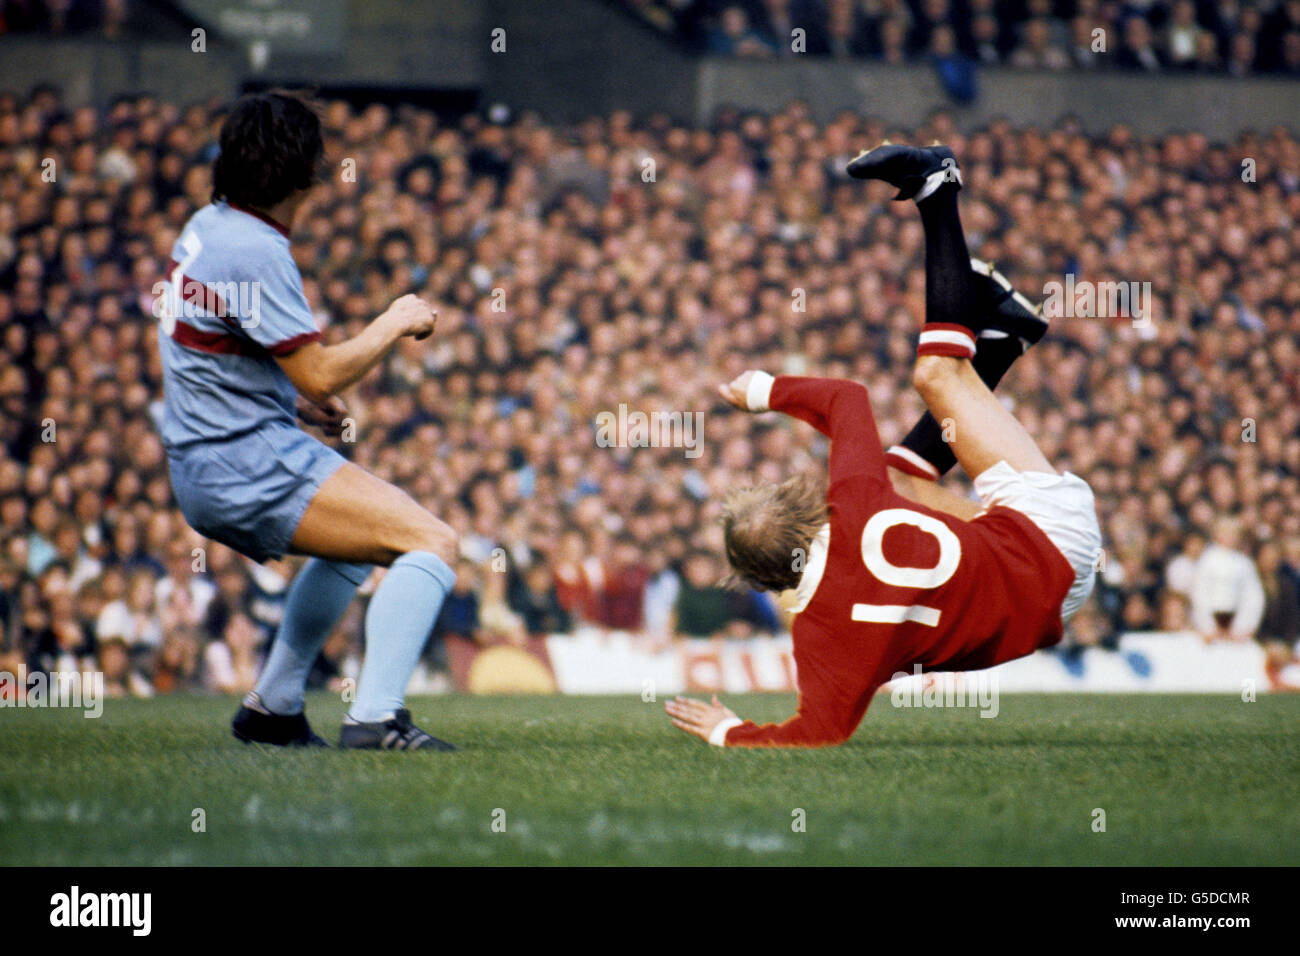 Fußball - Football League Division One - Manchester United / West Ham United. Denis Law, Manchester United Stockfoto